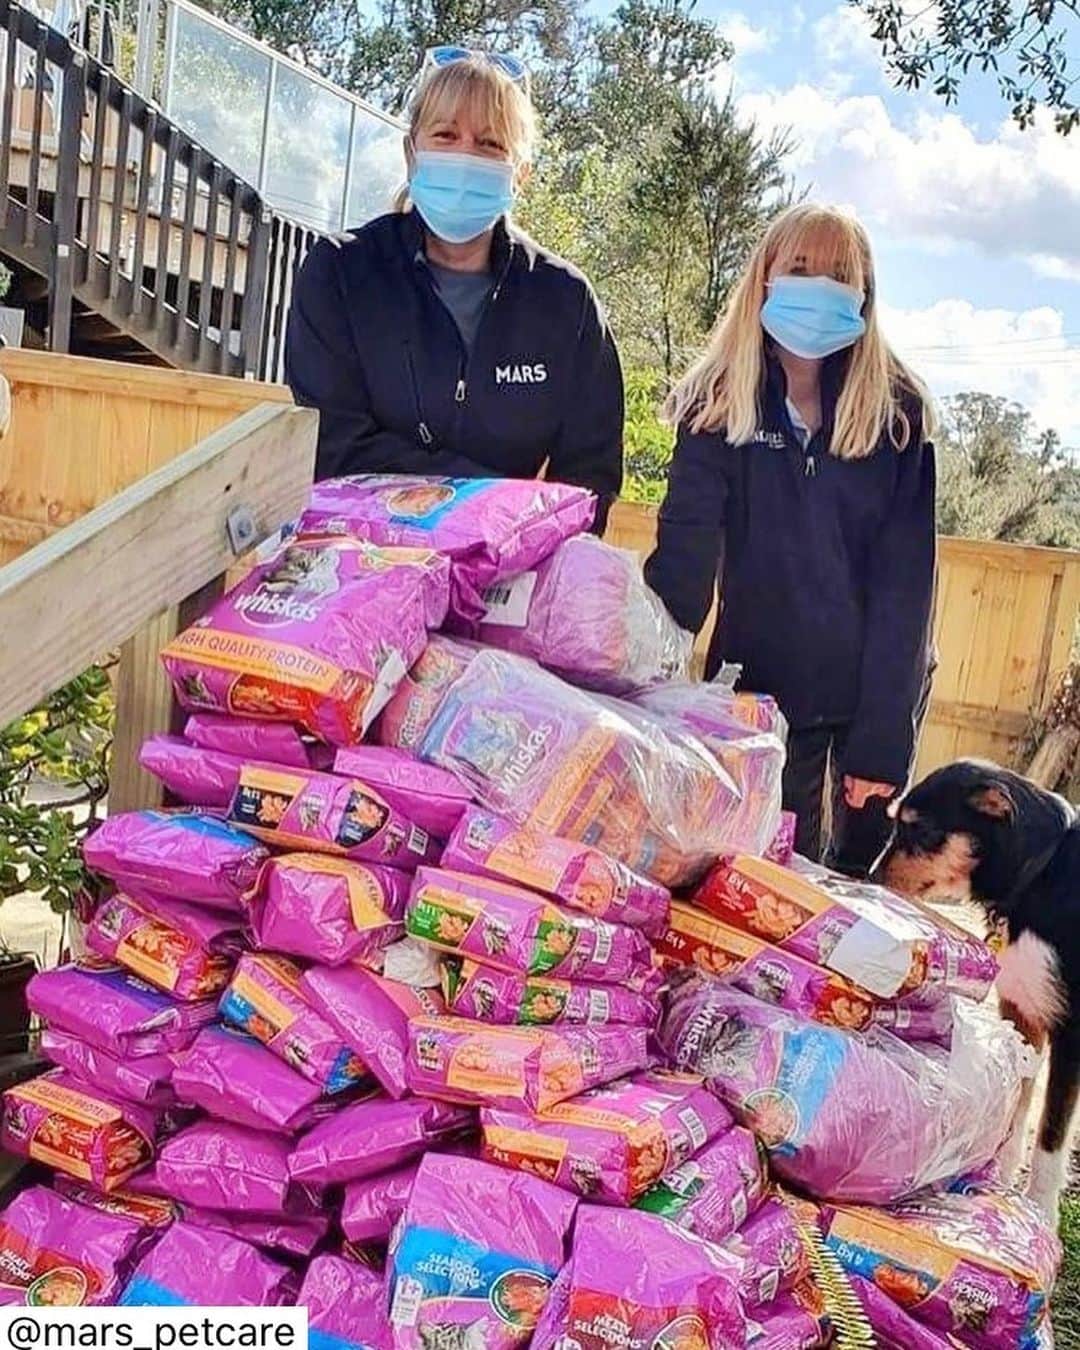 Marsのインスタグラム：「#repost @mars_petcare  Rachel Hessey, Territory Business Manager, Auckland, New Zealand - During the COVID lockdown in Auckland earlier this year, a number of animal charities ran out of cat food. There were posts on social media asking for any help they could get, but stock was limited in supermarkets and person to person contact was restricted at the time.   Fiona Laing, Inventory and Planning Analyst at Mars NZ, and I organized for pallets of damaged Whiskas cat food to be delivered to my own storage facility. Once it had arrived, Kim Dunnett-Smith (one of our wholesaler representatives), my daughter and I sorted through all the stock, resealing the damaged bags and making them ready for transport. We then used our own cars to deliver the food to some of the charities with the greatest need.   Previously, my daughter and I had raised funds for Gutter Kitties, Auckland’s largest no-kill cat rescue center. We attended cat shows to sell raffle tickets in our local community, with all the prizes donated from Mars. We’d also assisted in bake sales and sold cookies to raise funds for Gutter Kitties at a time when the charity had a $10,000 vets bill to pay. The bake sales would usually raise between $500-$600 and the raffles over $300.   I’ve enjoyed sharing this experience with my daughter, showing her how something small can make an incredible difference to so many. During a time of great uncertainty, I’m glad we were able to provide some certainty for the shelters, so they knew they’d able to feed and look after all the animals in their care, and hopefully find them loving homes.   As a veterinary nurse myself, I’ve seen the difference that good nutrition, a great home and a loving family can make to any animal. We have 3 cats of our own, Monsta (19), Teddy (4) and Griffin (6 months). Monsta and Teddy are both rescue cats and we adopted Teddy from Gutter Kitties. They could’ve had a much different life if they hadn’t been rescued by the shelters and then adopted by us. In the words of Winnie the Pooh: “sometimes the smallest things take up the most room in your heart” and, for us, that is our family of three ginger cats. #EndingPetHomelessness」